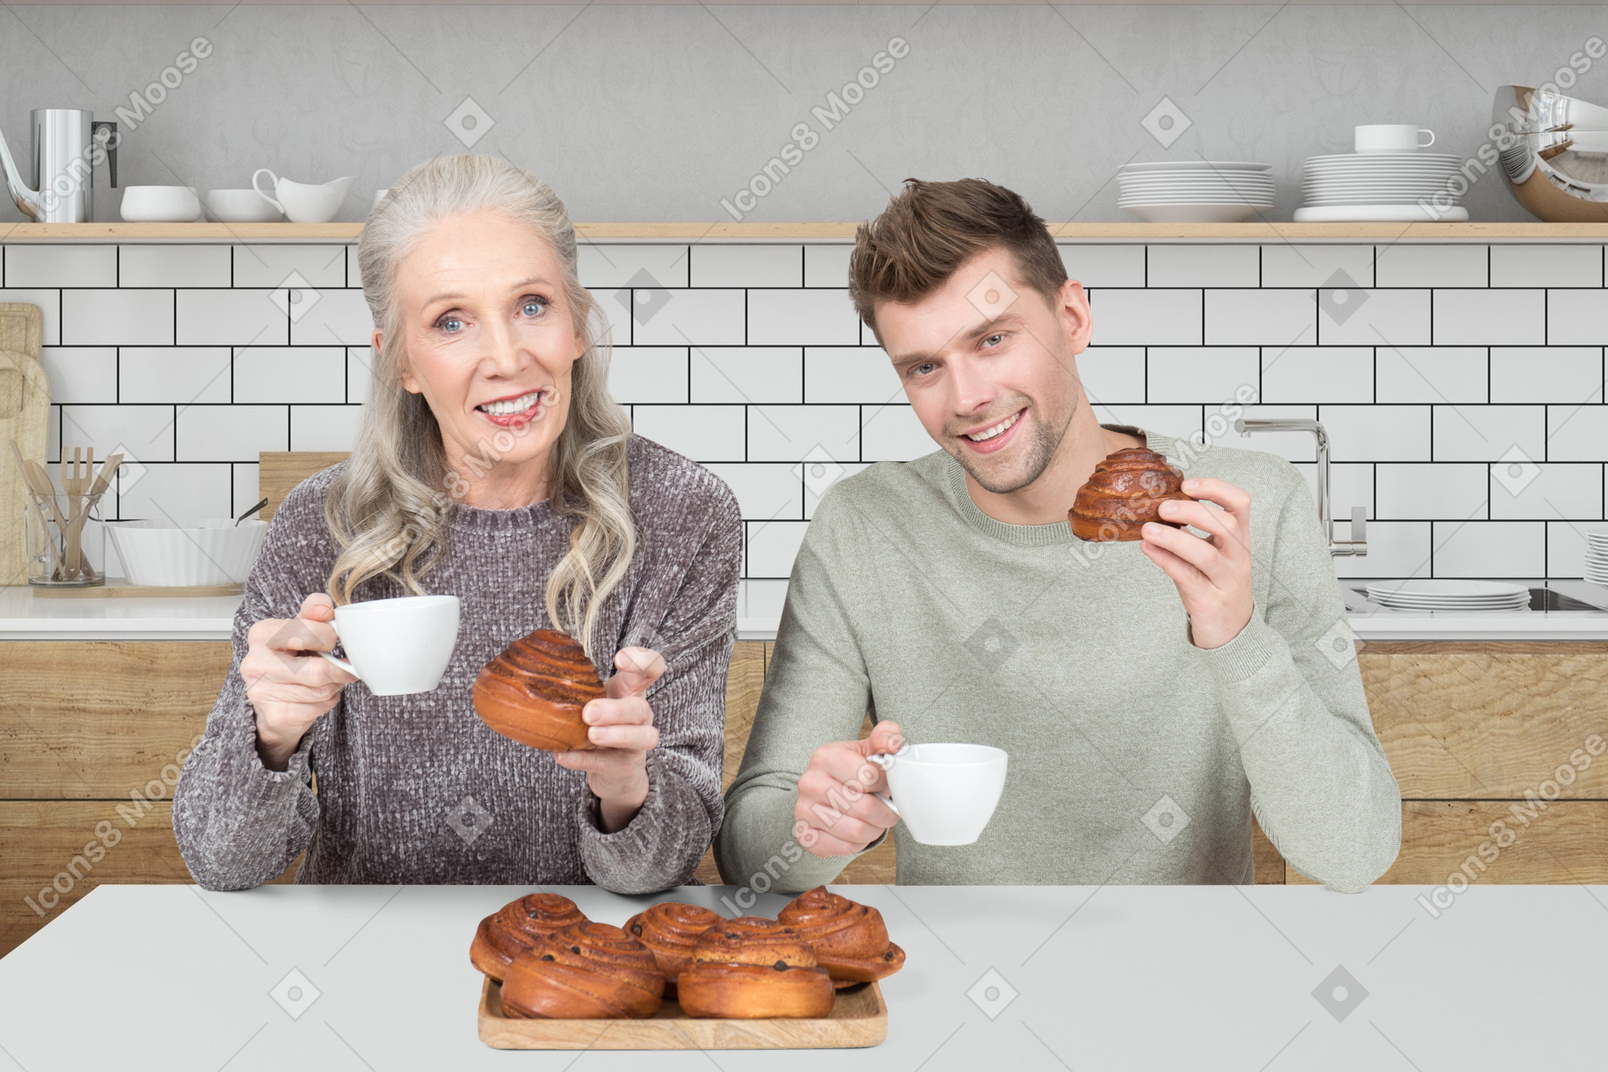 An old woman and a young man drinking tea with cinnamon rolls